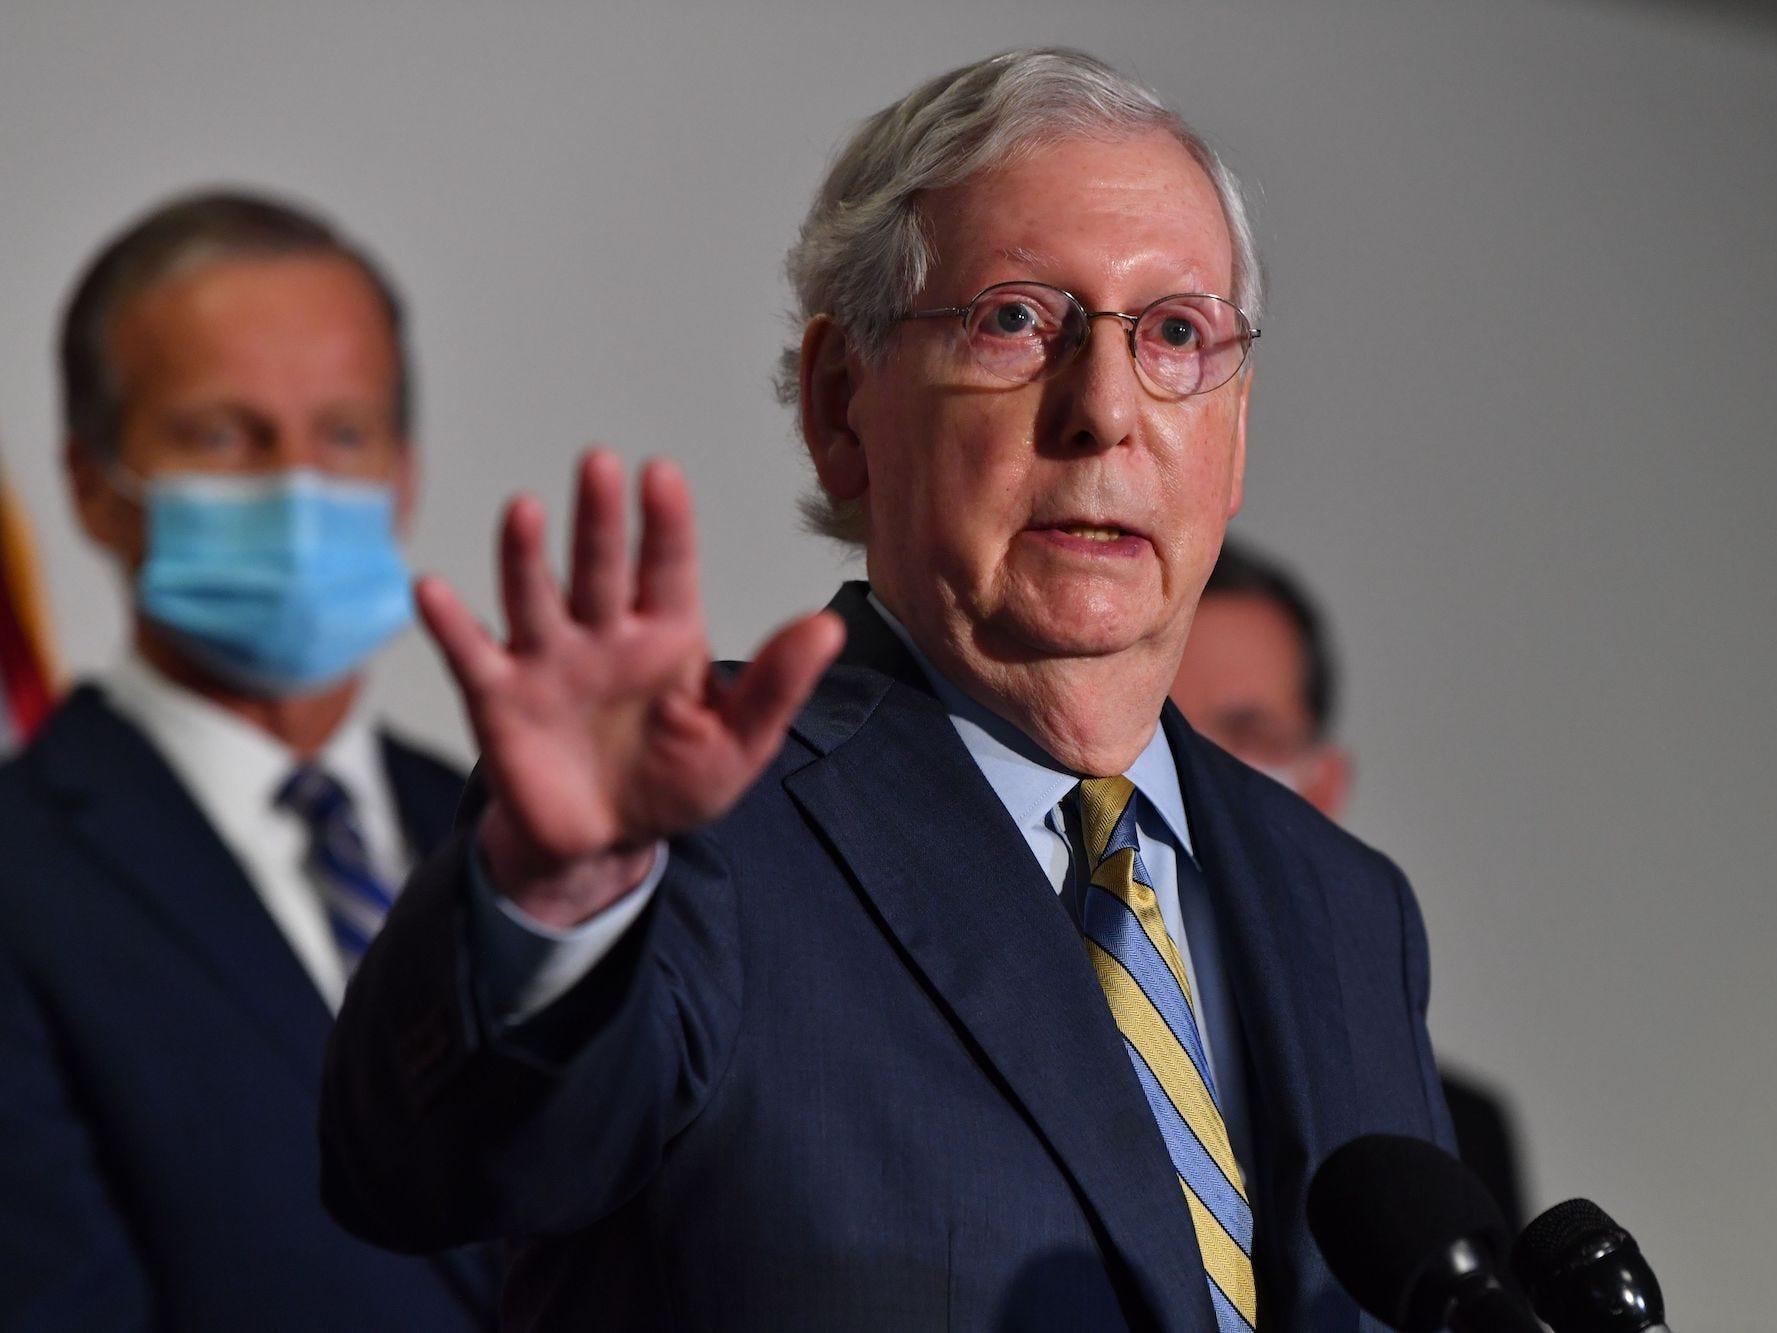 Mitch Mcconnell Just Adjourned The Senate Until November 9 Ending The Prospect Of Additional Coronavirus Relief Until After The Election Business Insider India